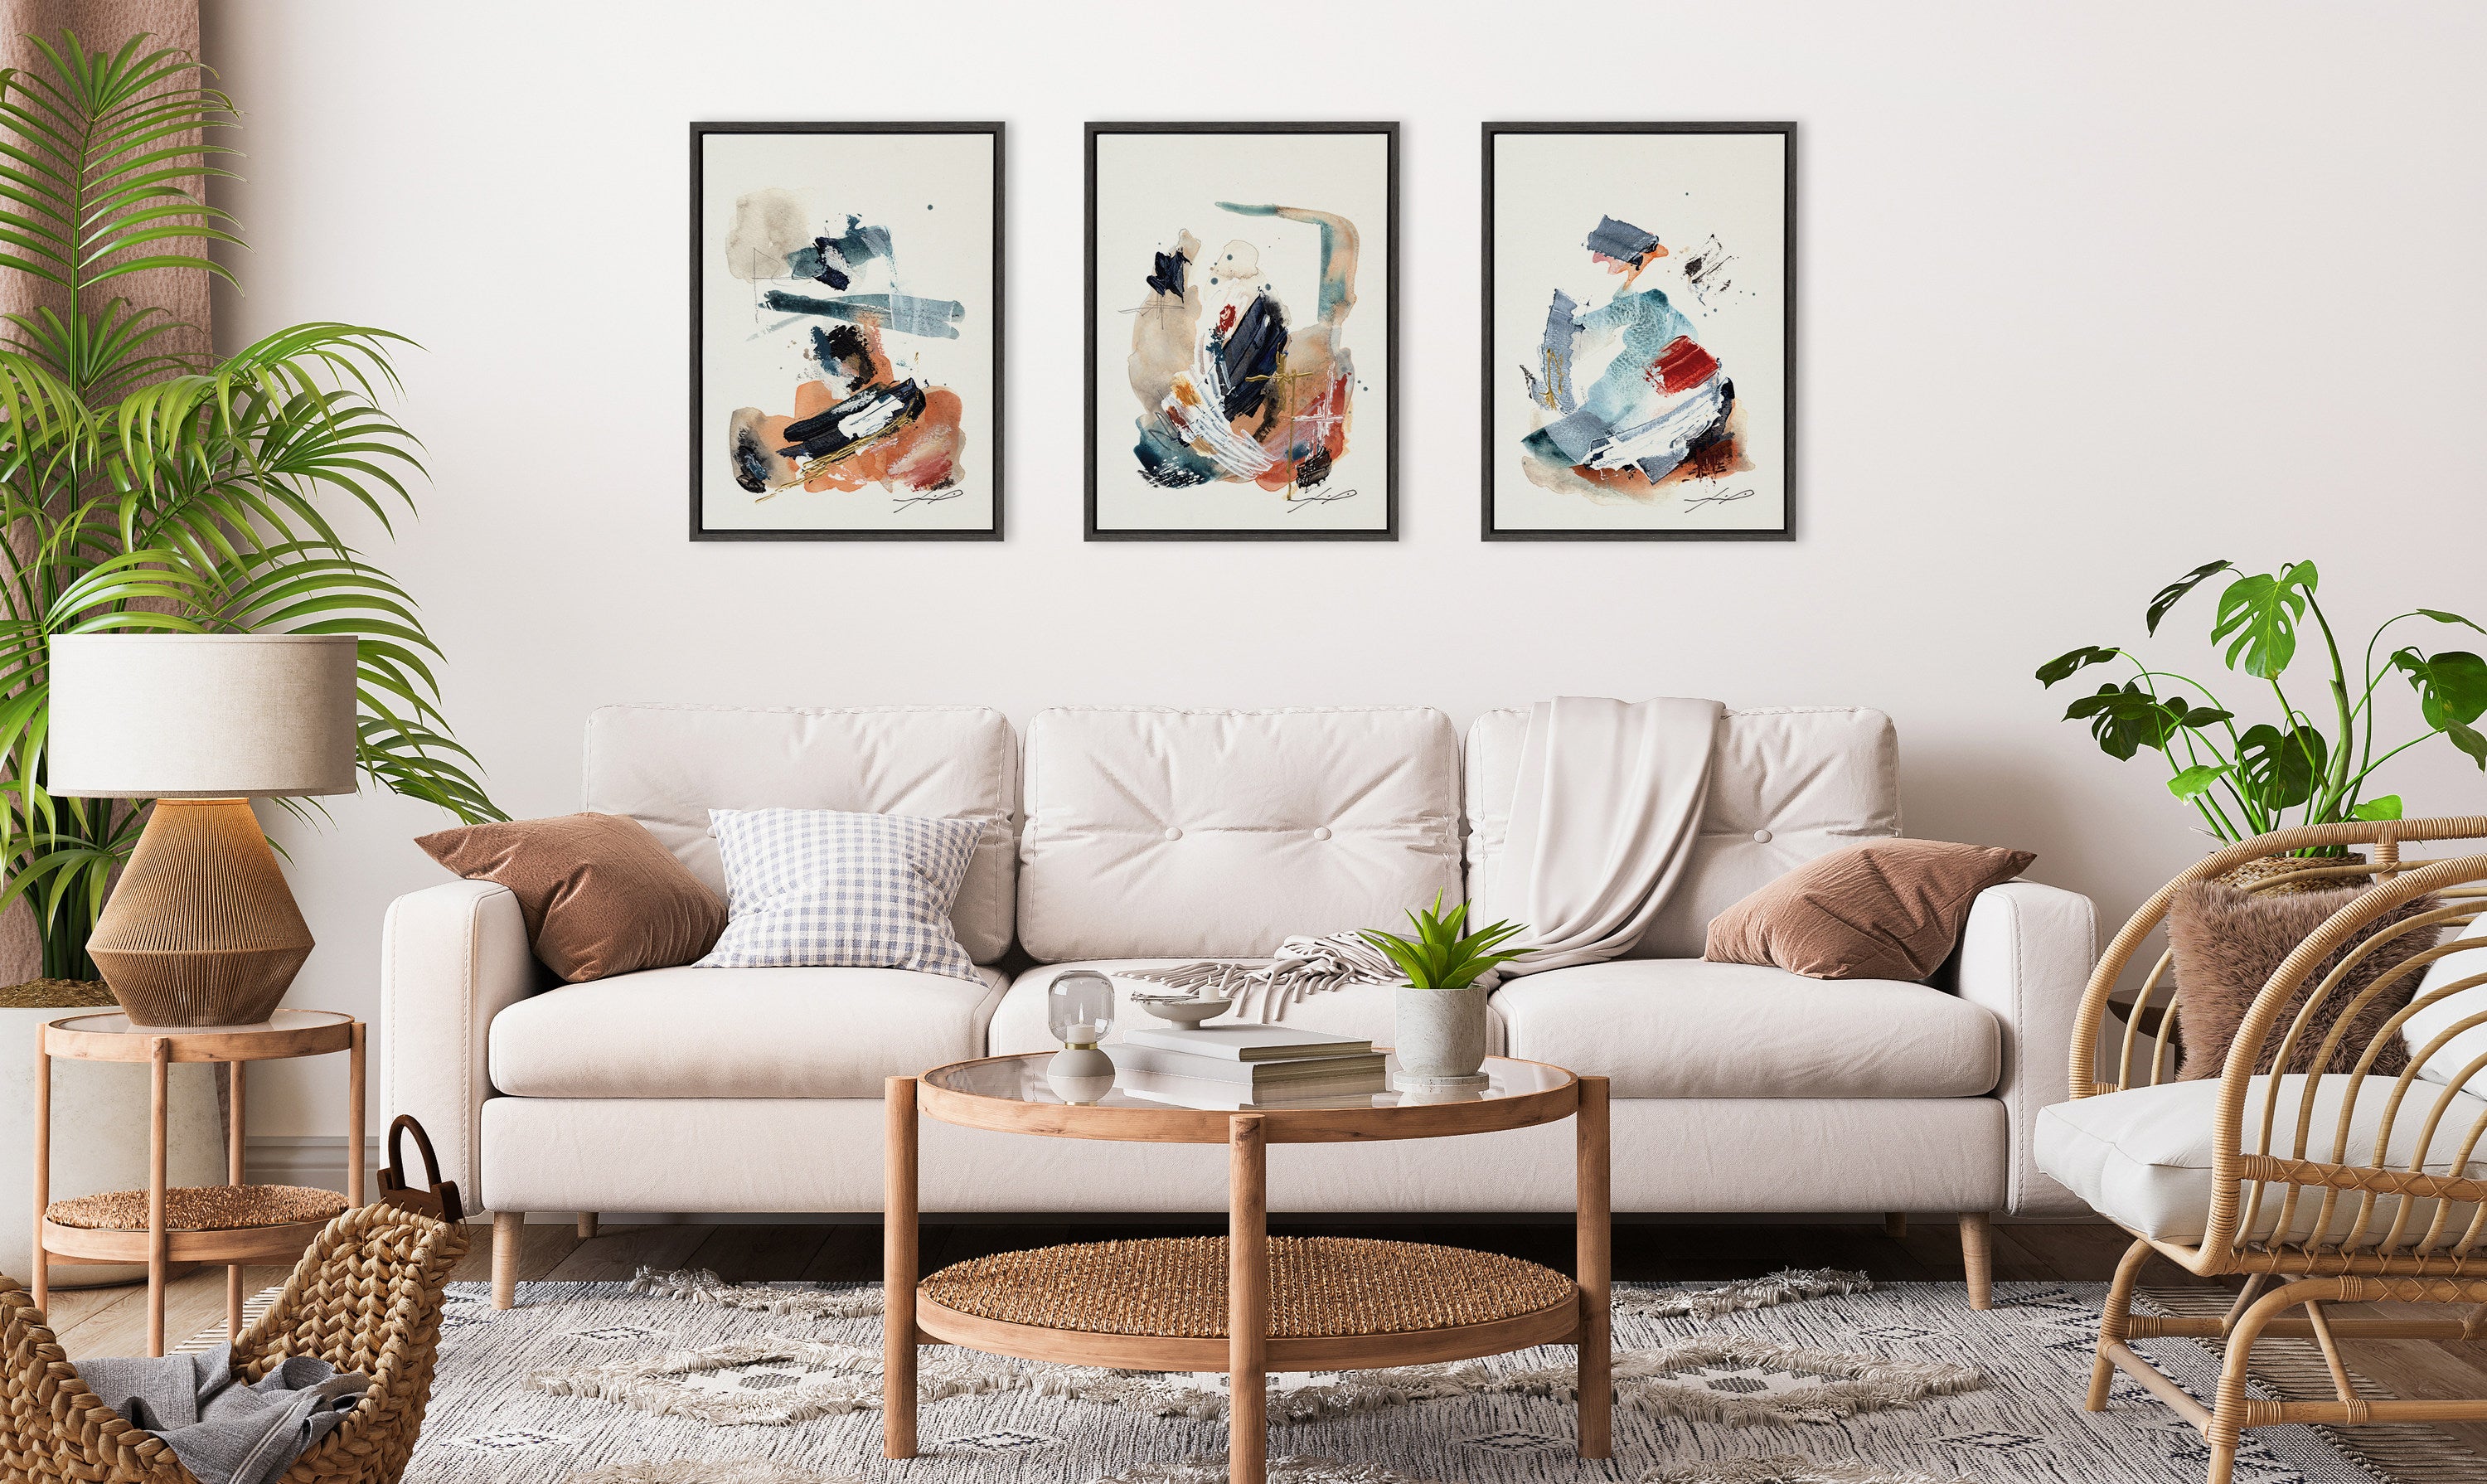 Sylvie By The Fireplace Series Framed Canvas Art Set by Xizhou Xie